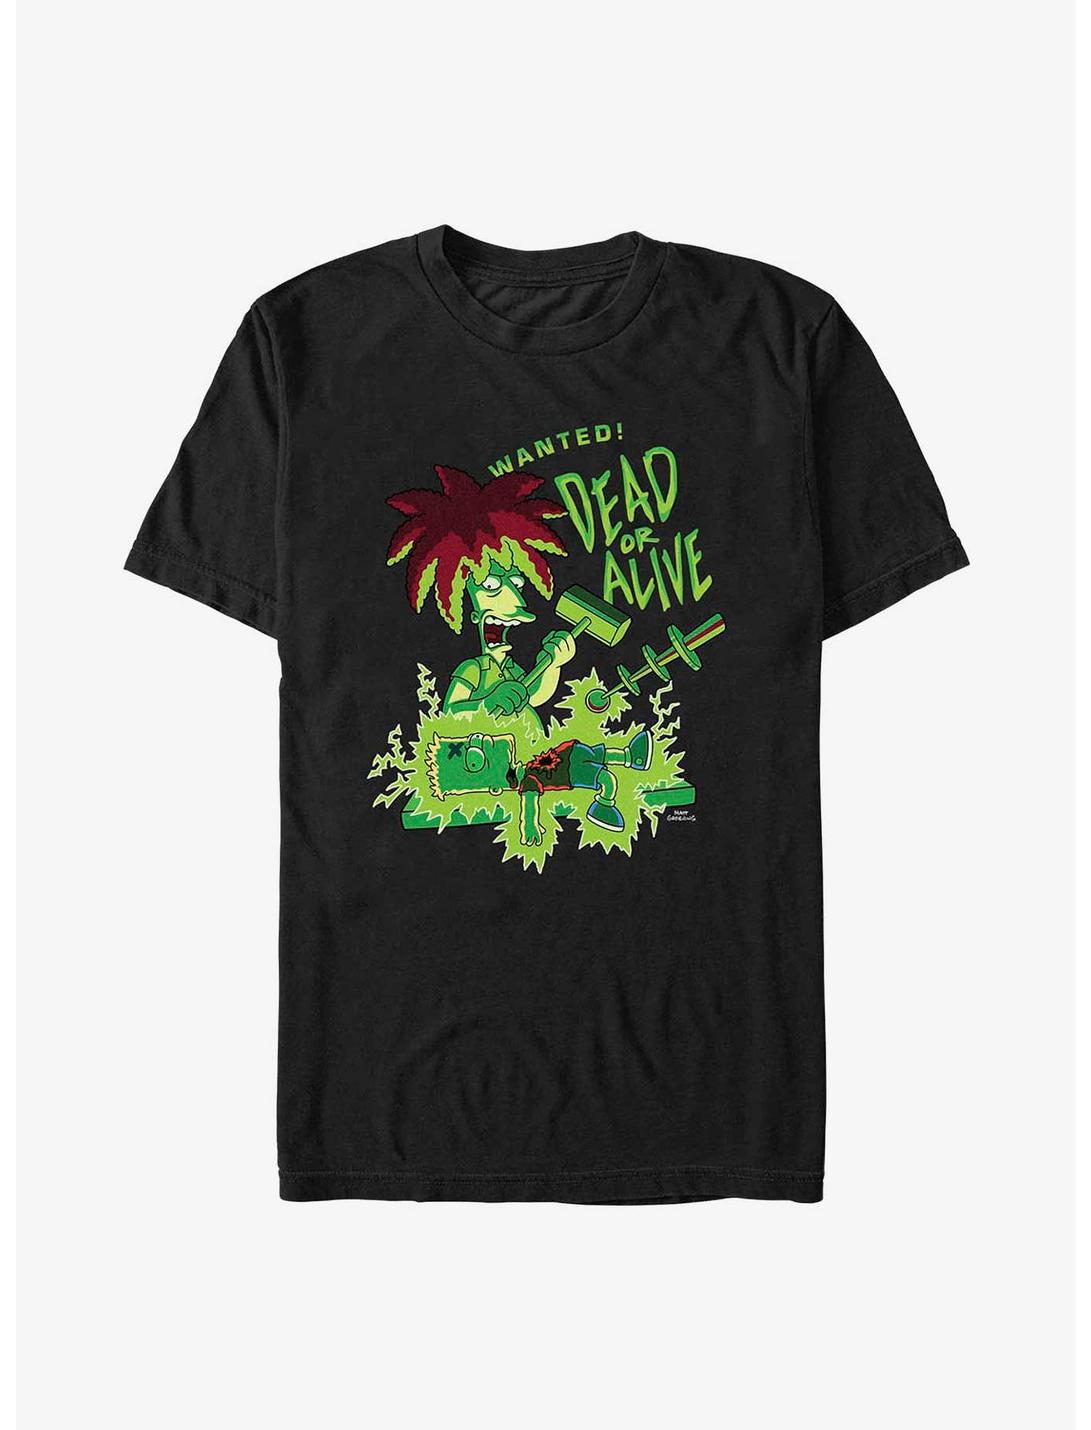 The Simpsons Bart Wanted Dead Or Alive Sideshow Bob T-Shirt, BLACK, hi-res